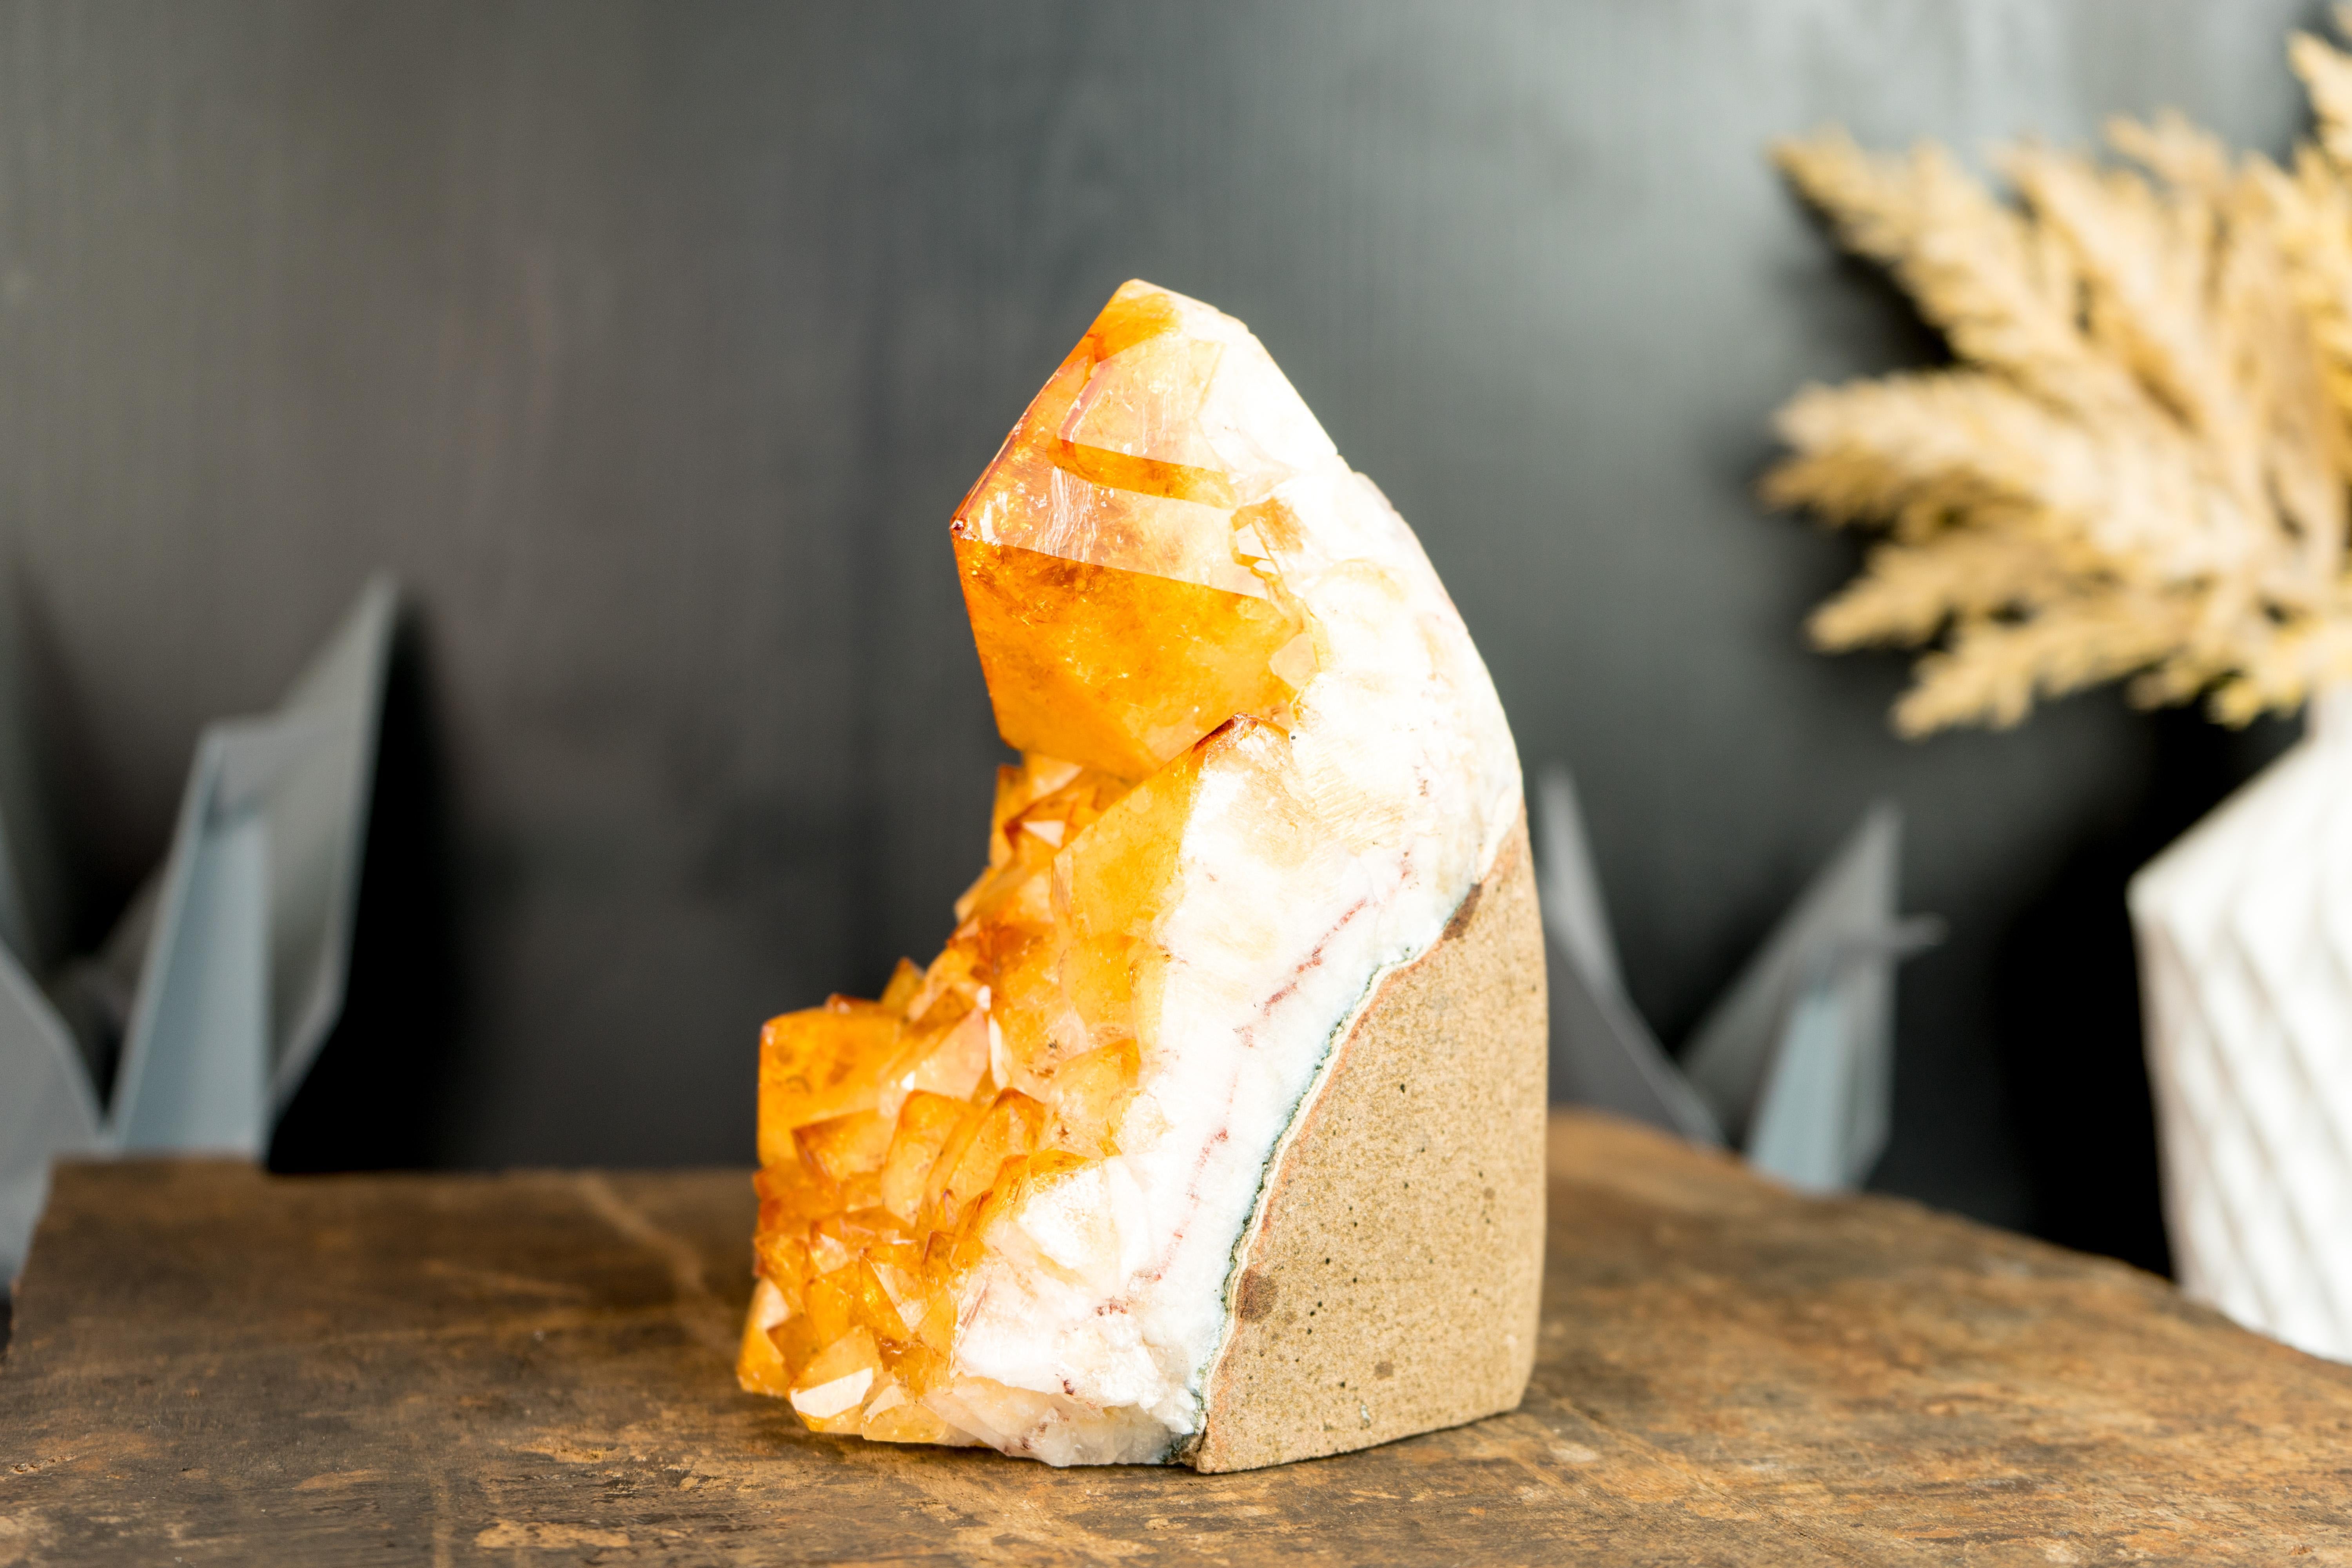 Contemporary Citrine Cluster with Rare Large Citrine Point, Orange Citrine Color, Intact For Sale